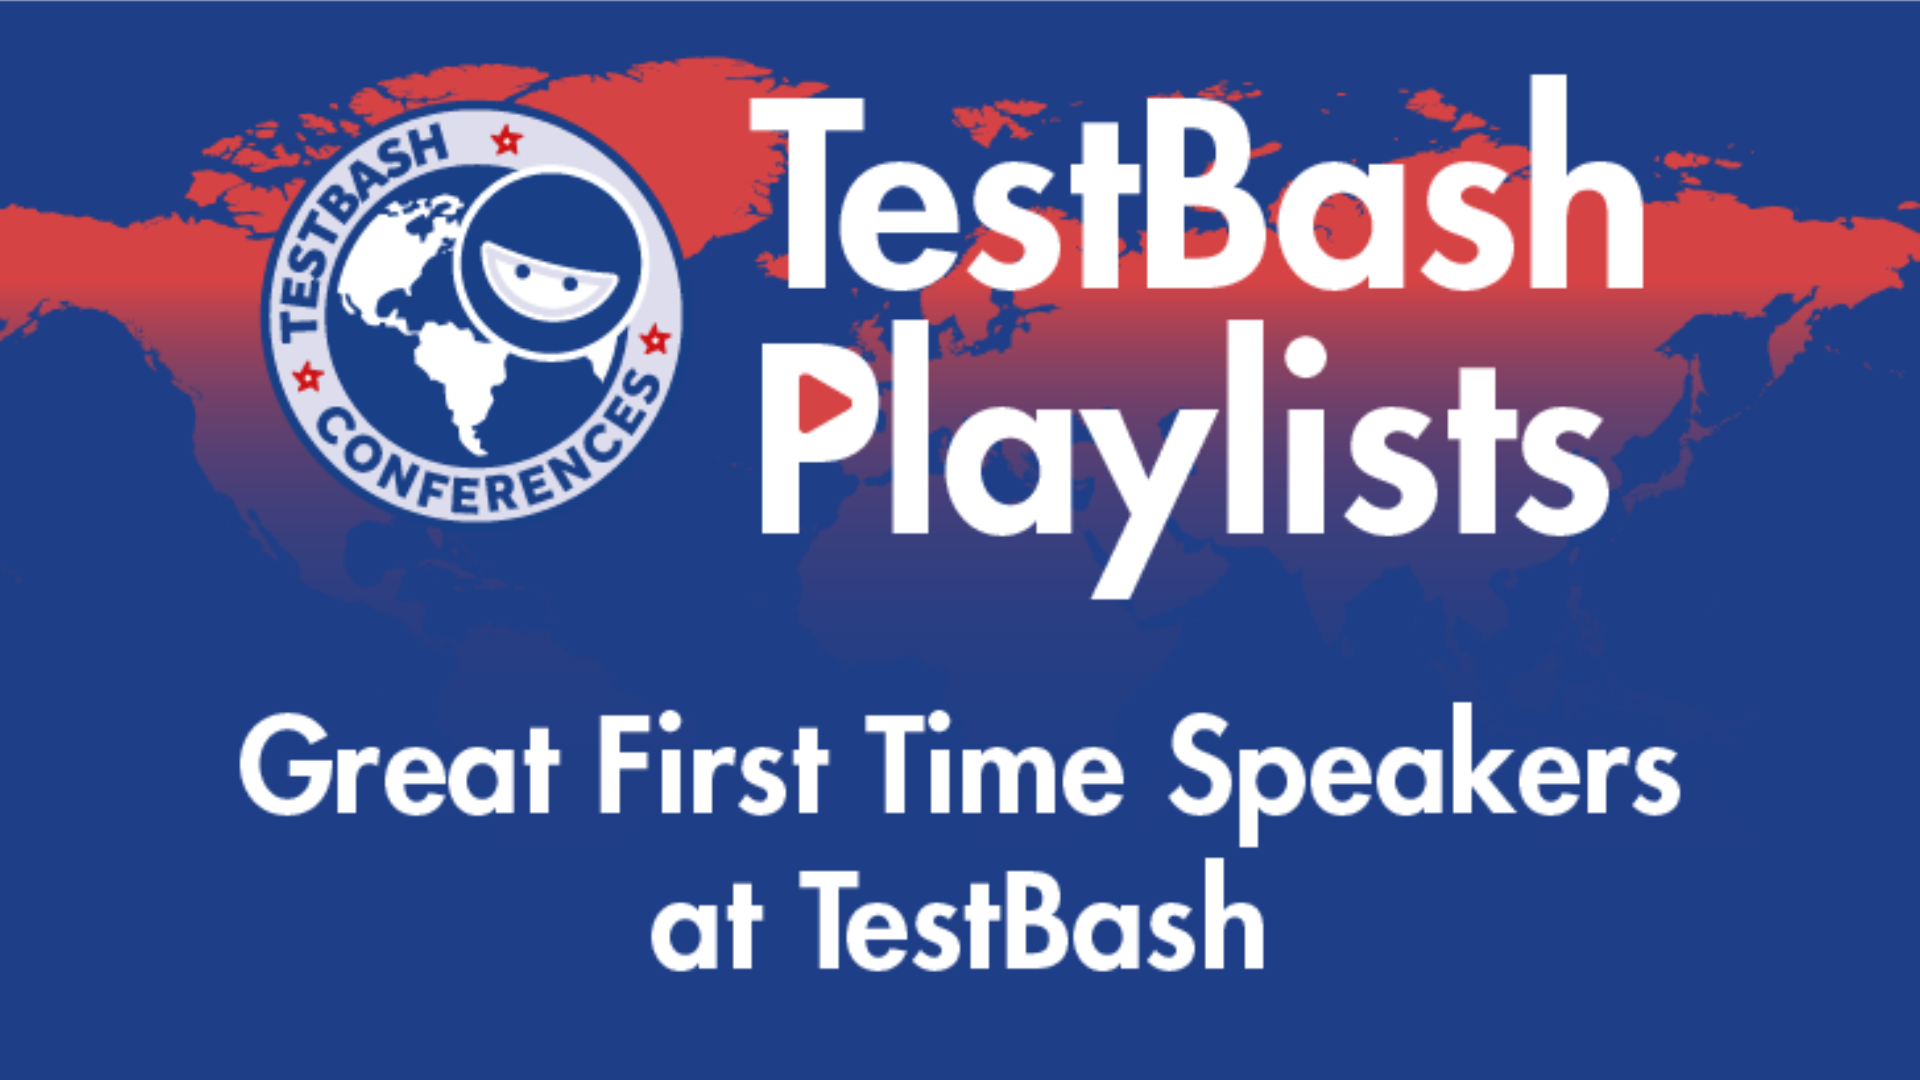 TestBash Playlists - Great First Time Speakers at TestBash